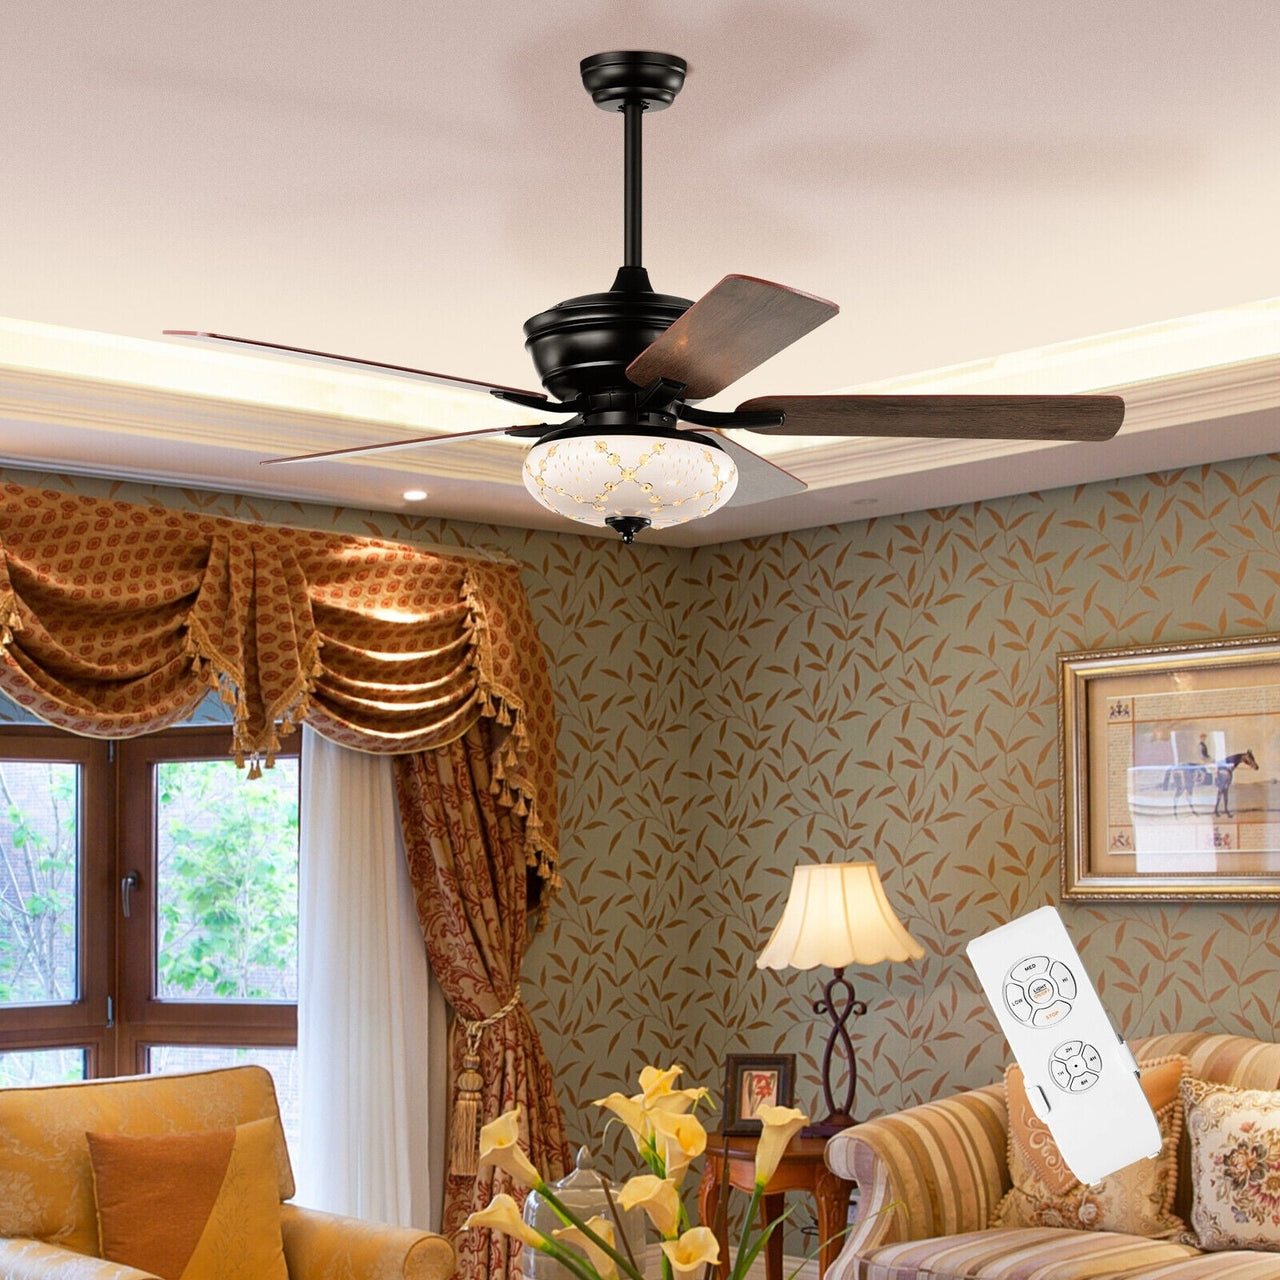 52 Inch Ceiling Fan with 3 Wind Speeds and 5 Reversible Blades